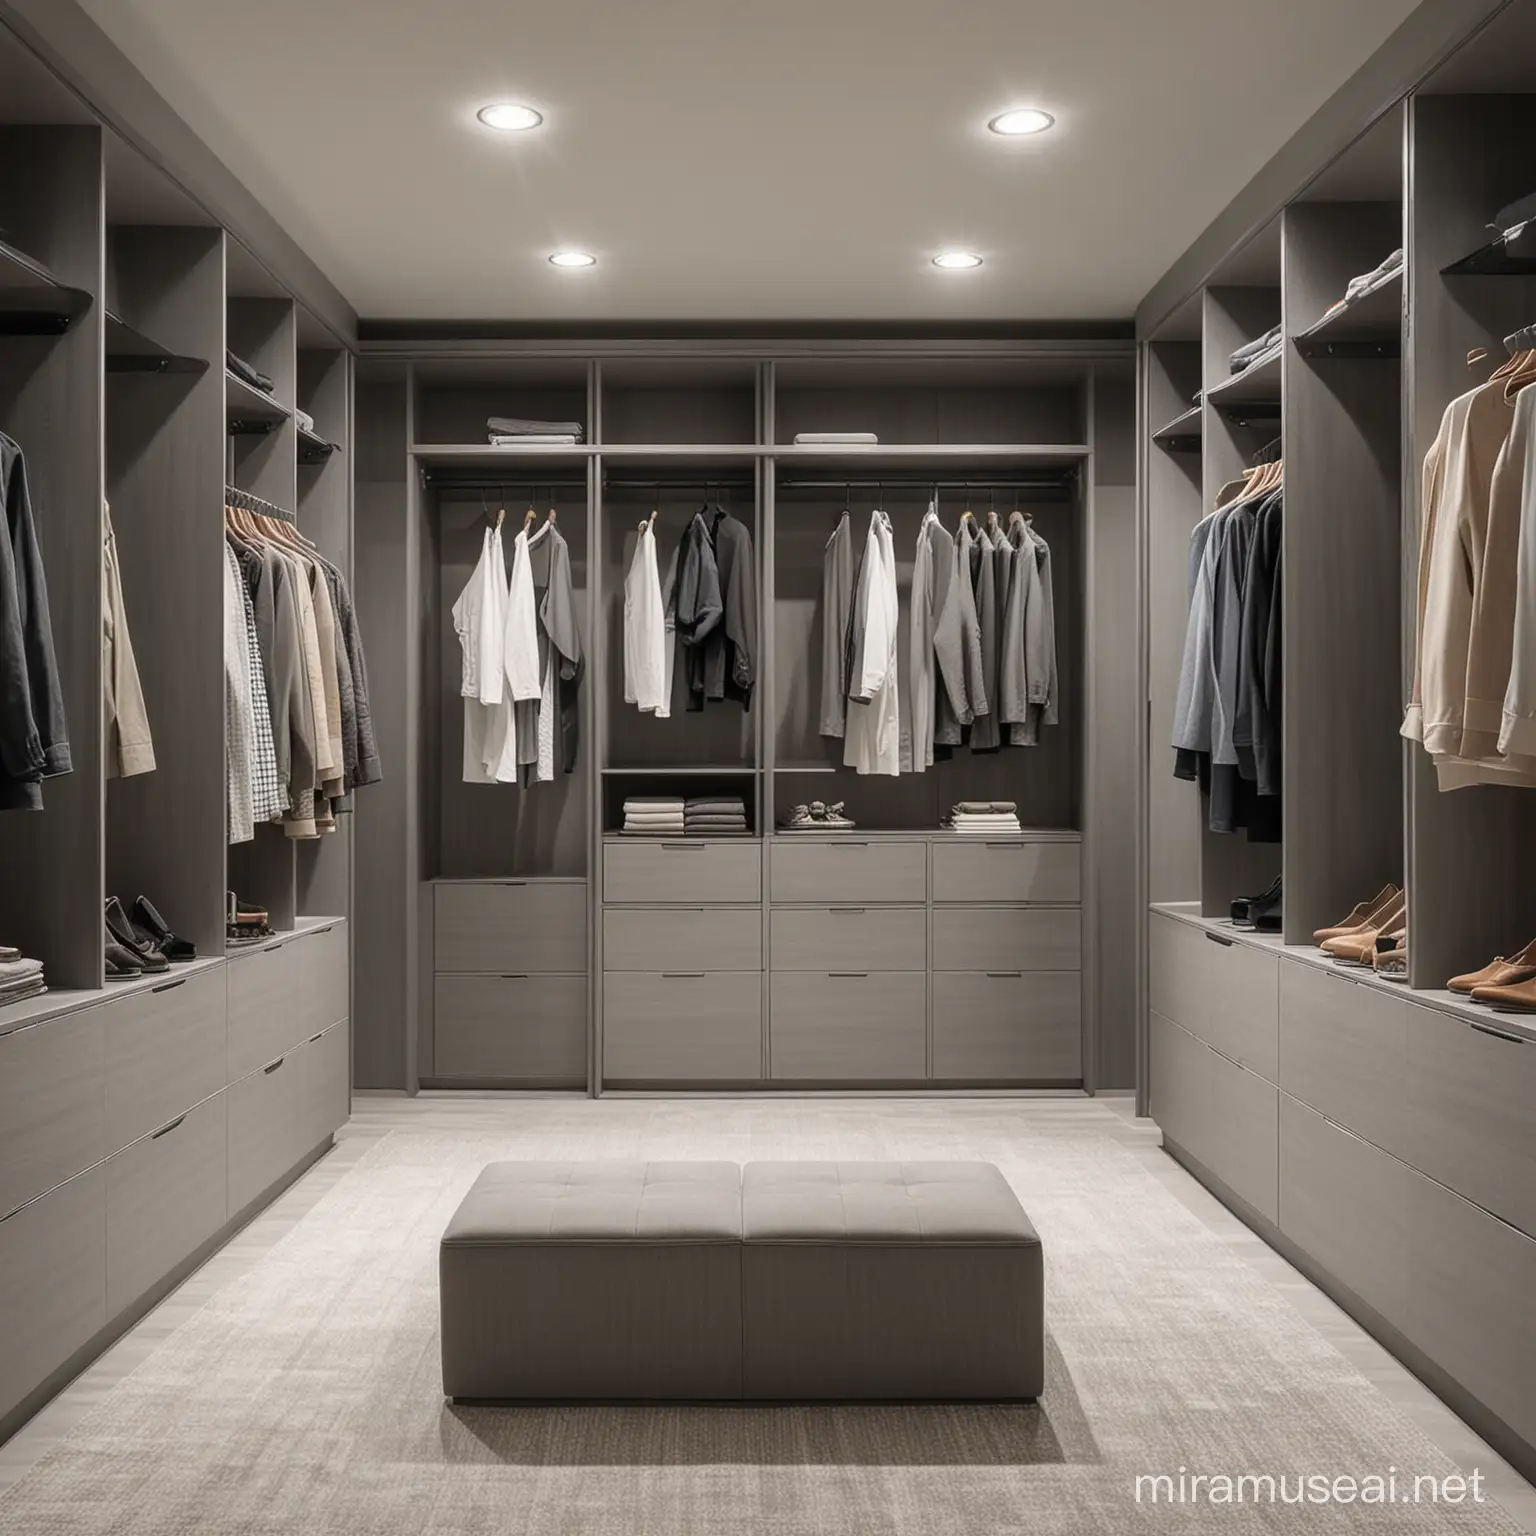 Design of a modern walk in closet, cabinets made from matte grey laminate, clean carpet, aesthetic and realistic, clothes neatly hung, seating area in the middle of the closet.